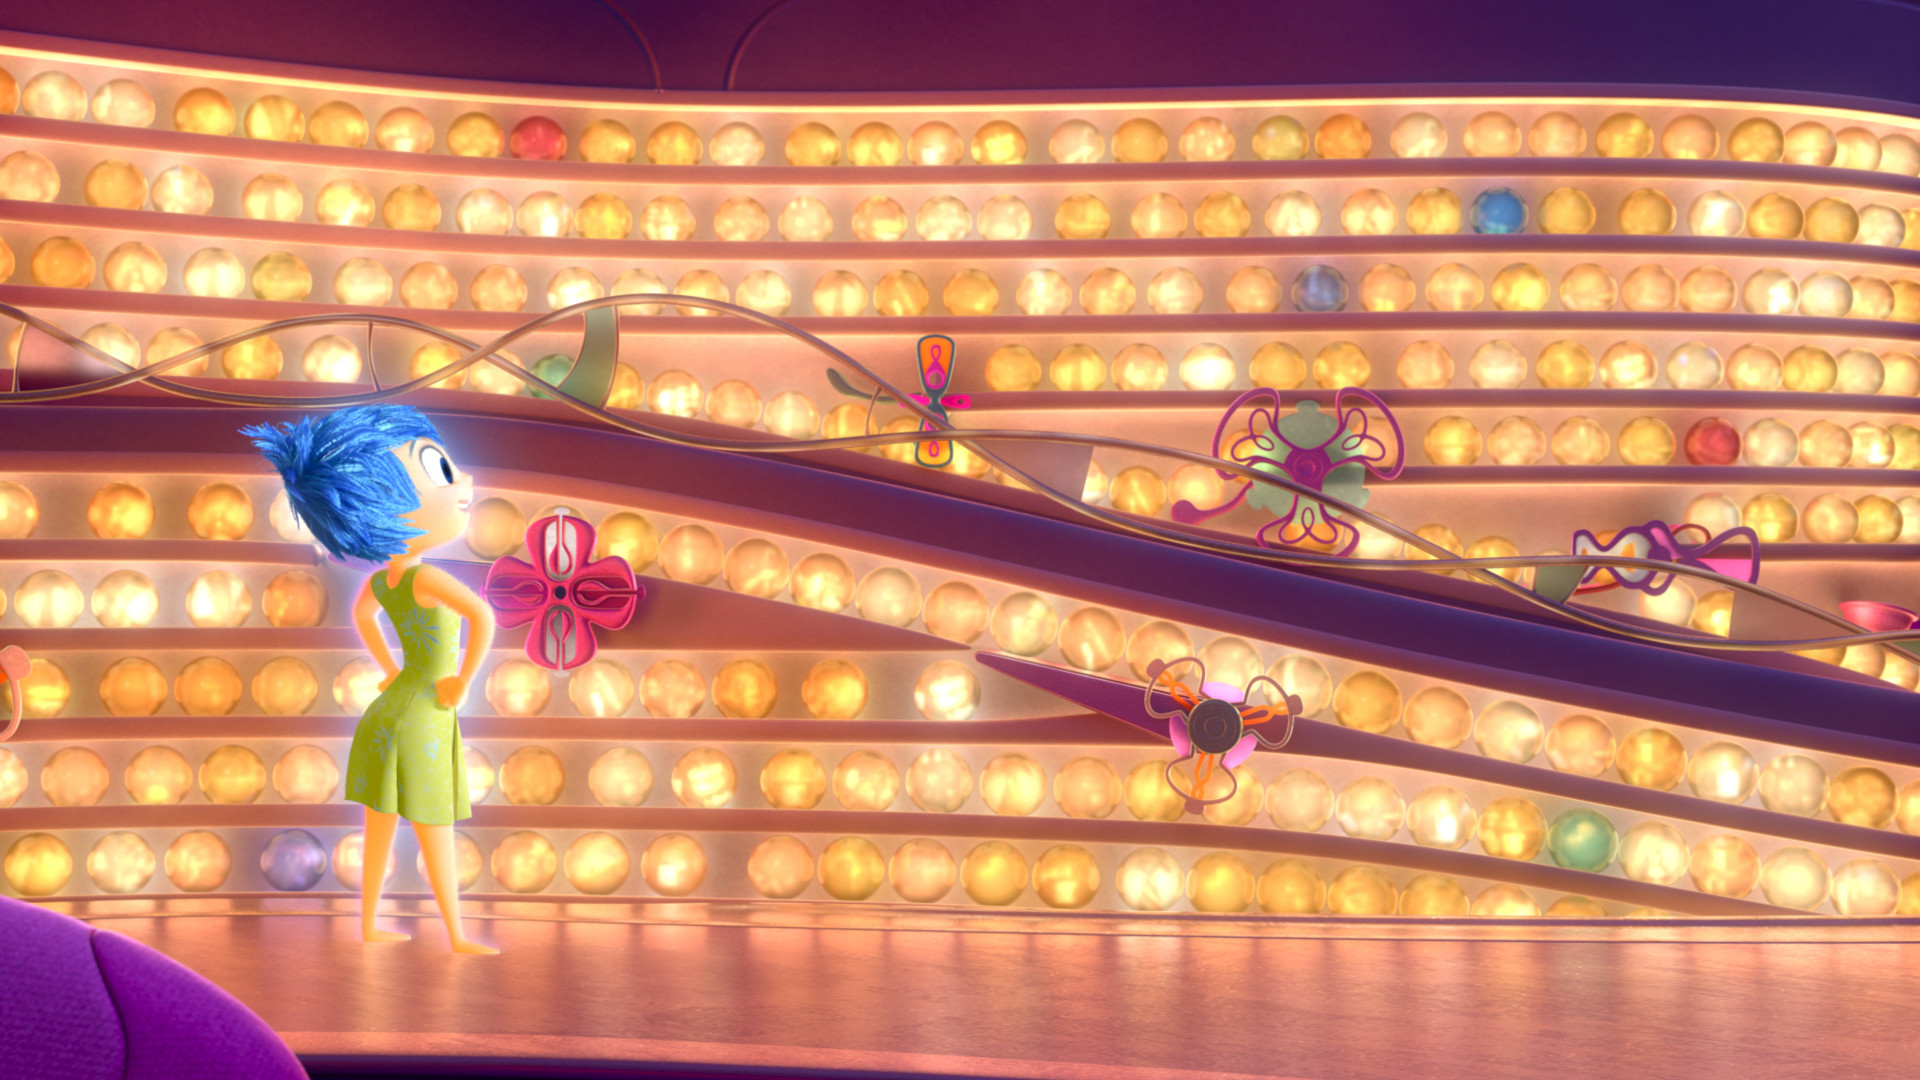 1920x1080 Disney-Pixar's new movie, Inside Out, combines beautiful animation,  creative storytelling, and a touch of neuroscience to explain the “voices”  inside 11 ...